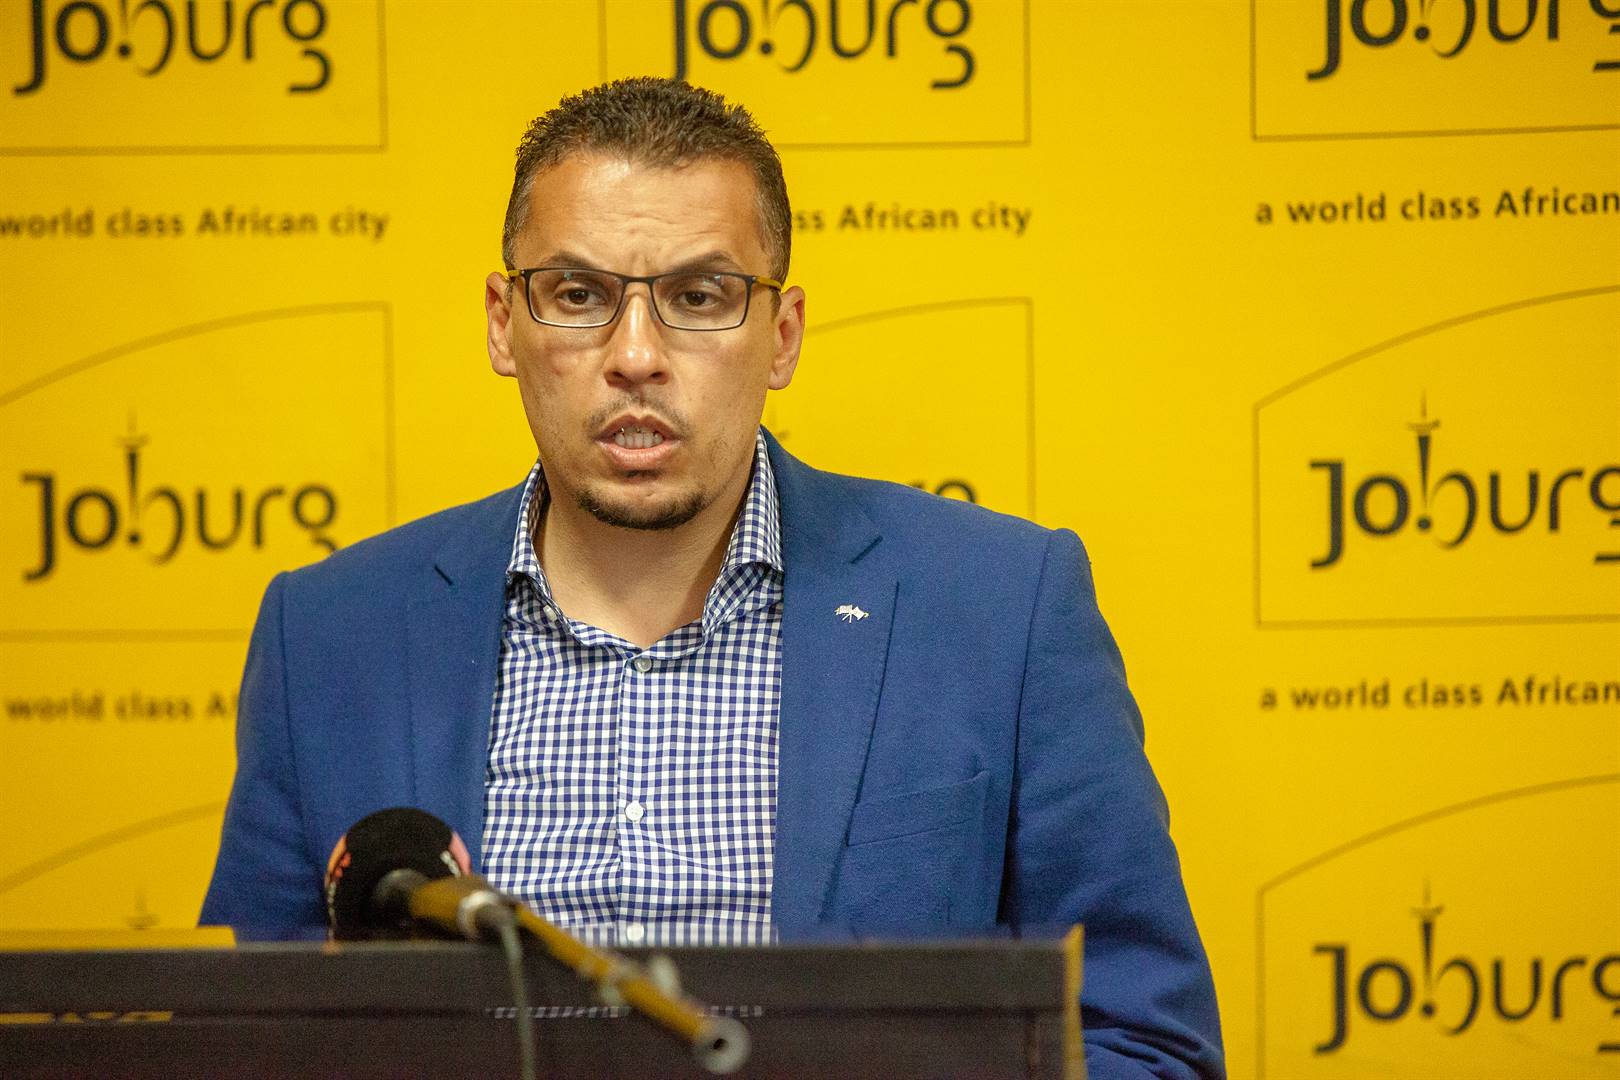 News24 | City of Joburg, Floyd Brink held in contempt after cutting business' water supply amid bill dispute